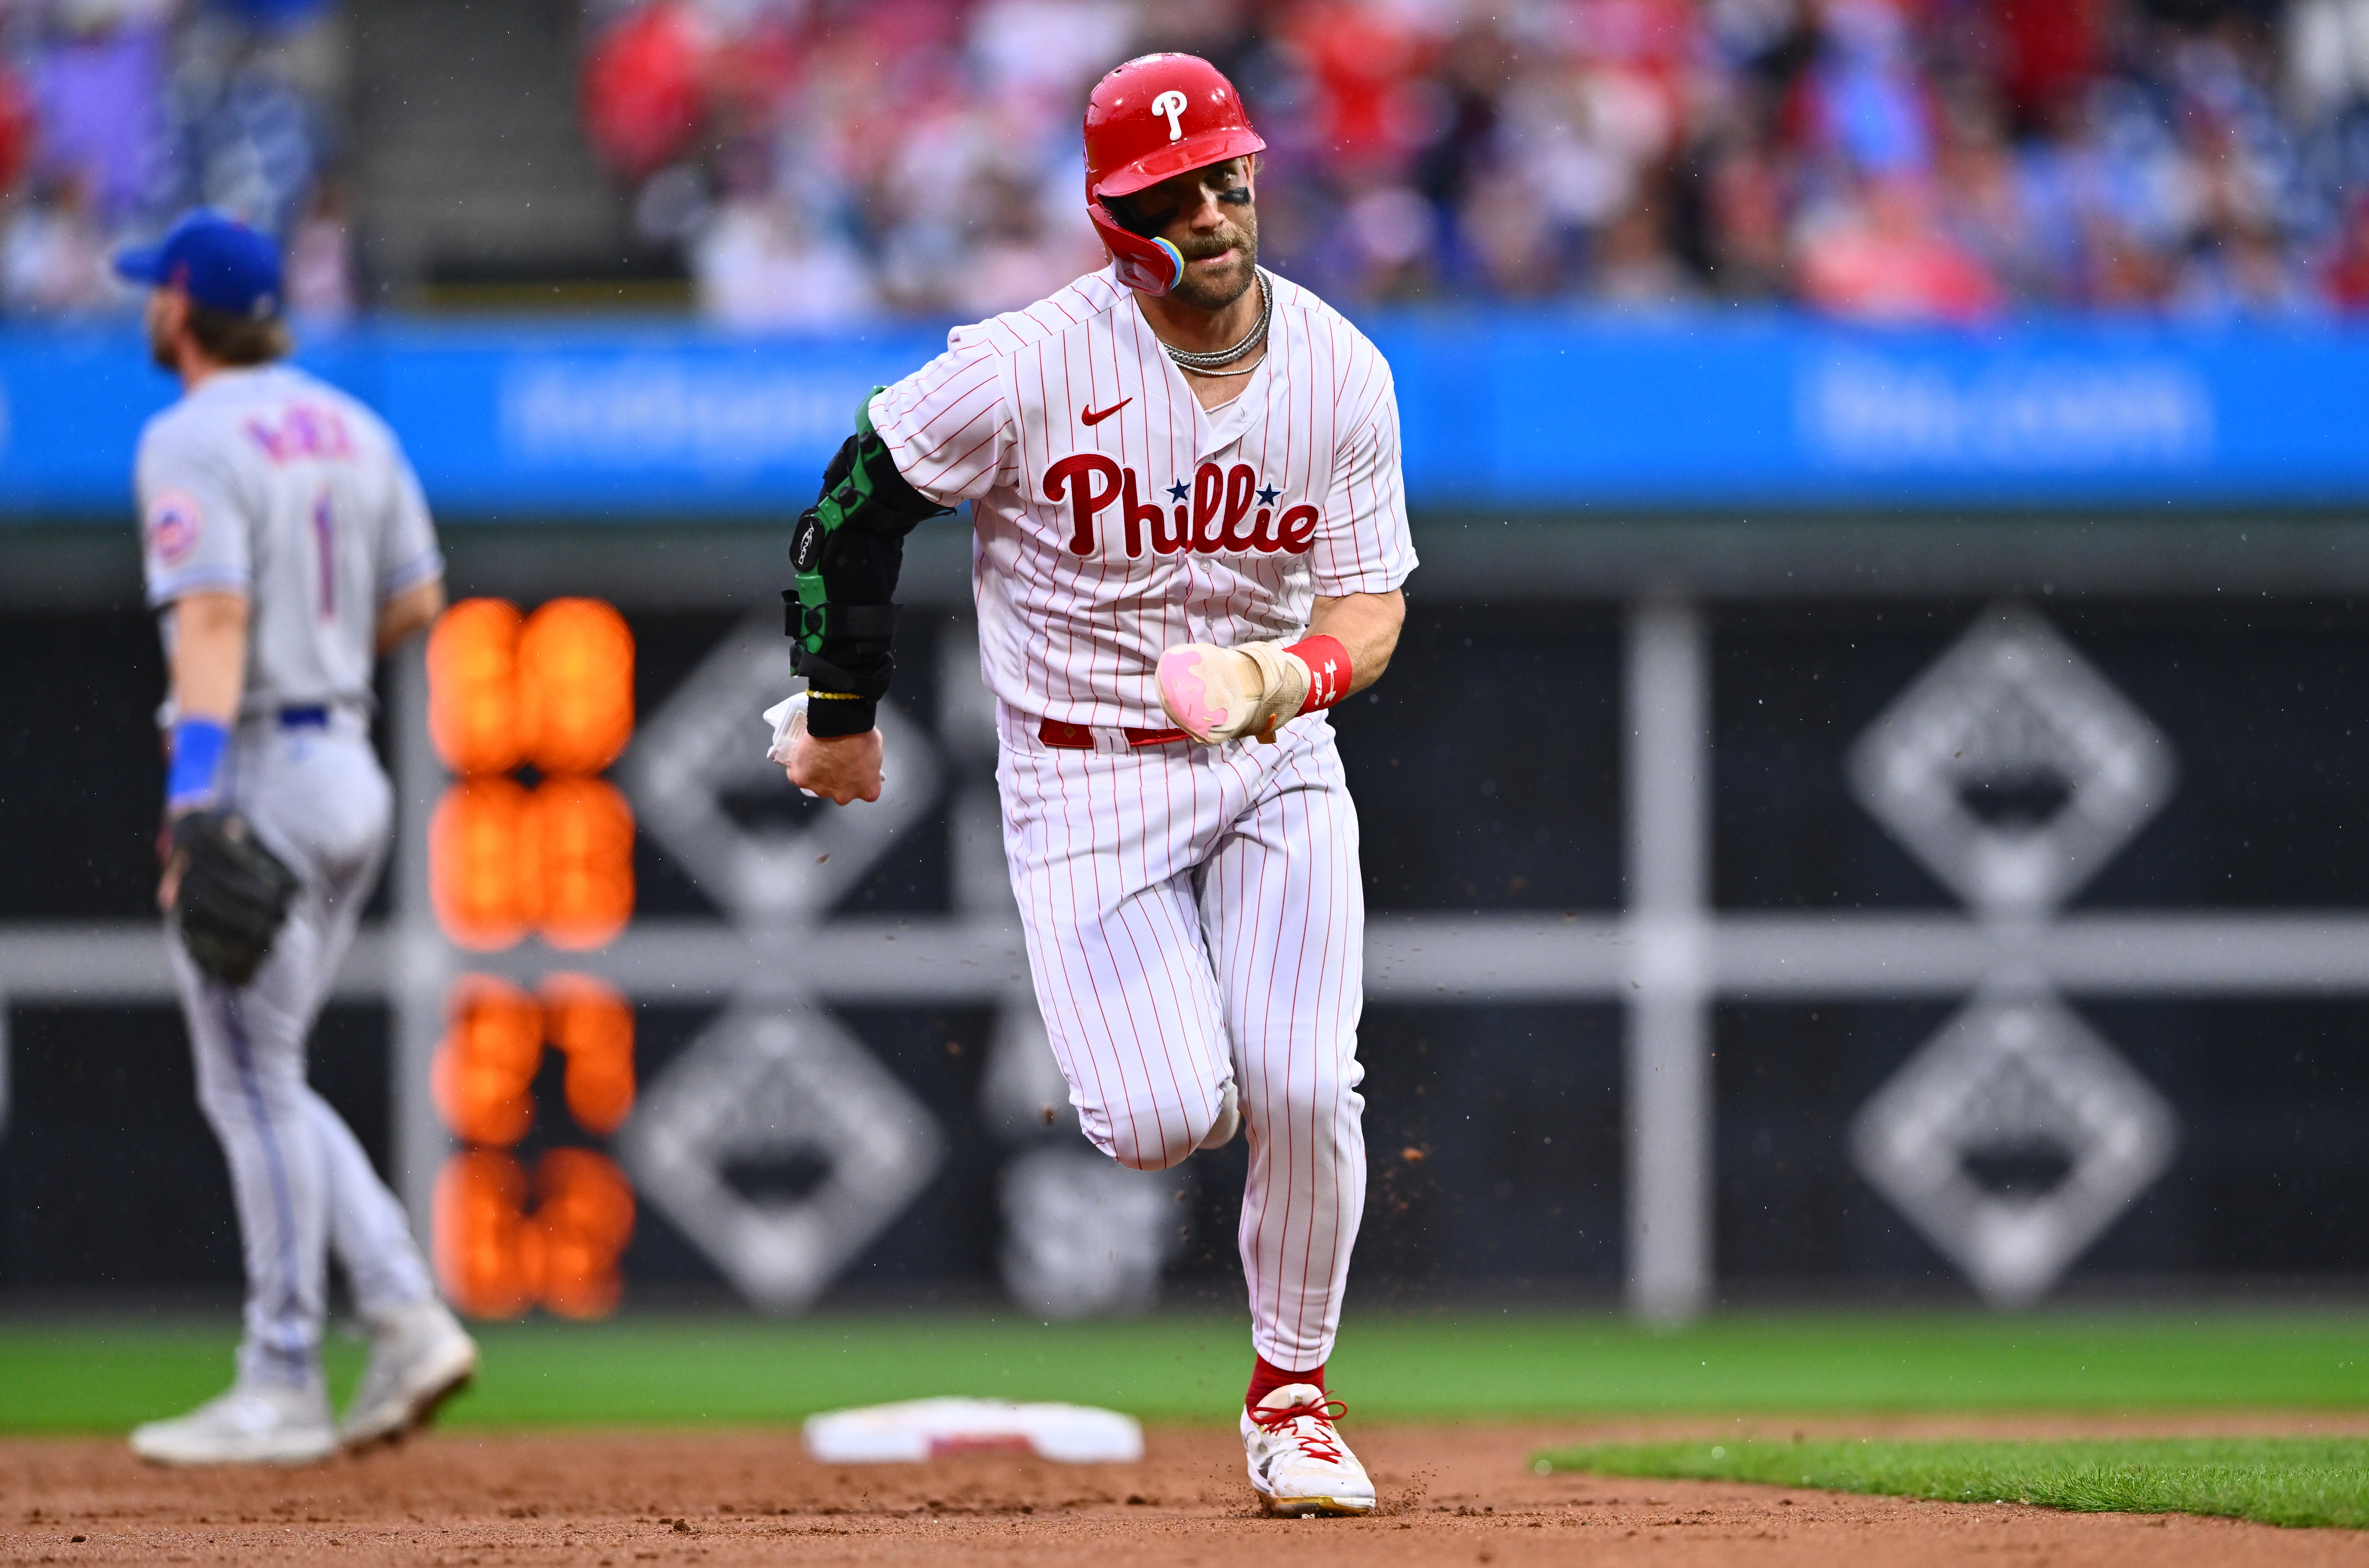 Walker and Turner lead the Phillies past the struggling Mets 5-1